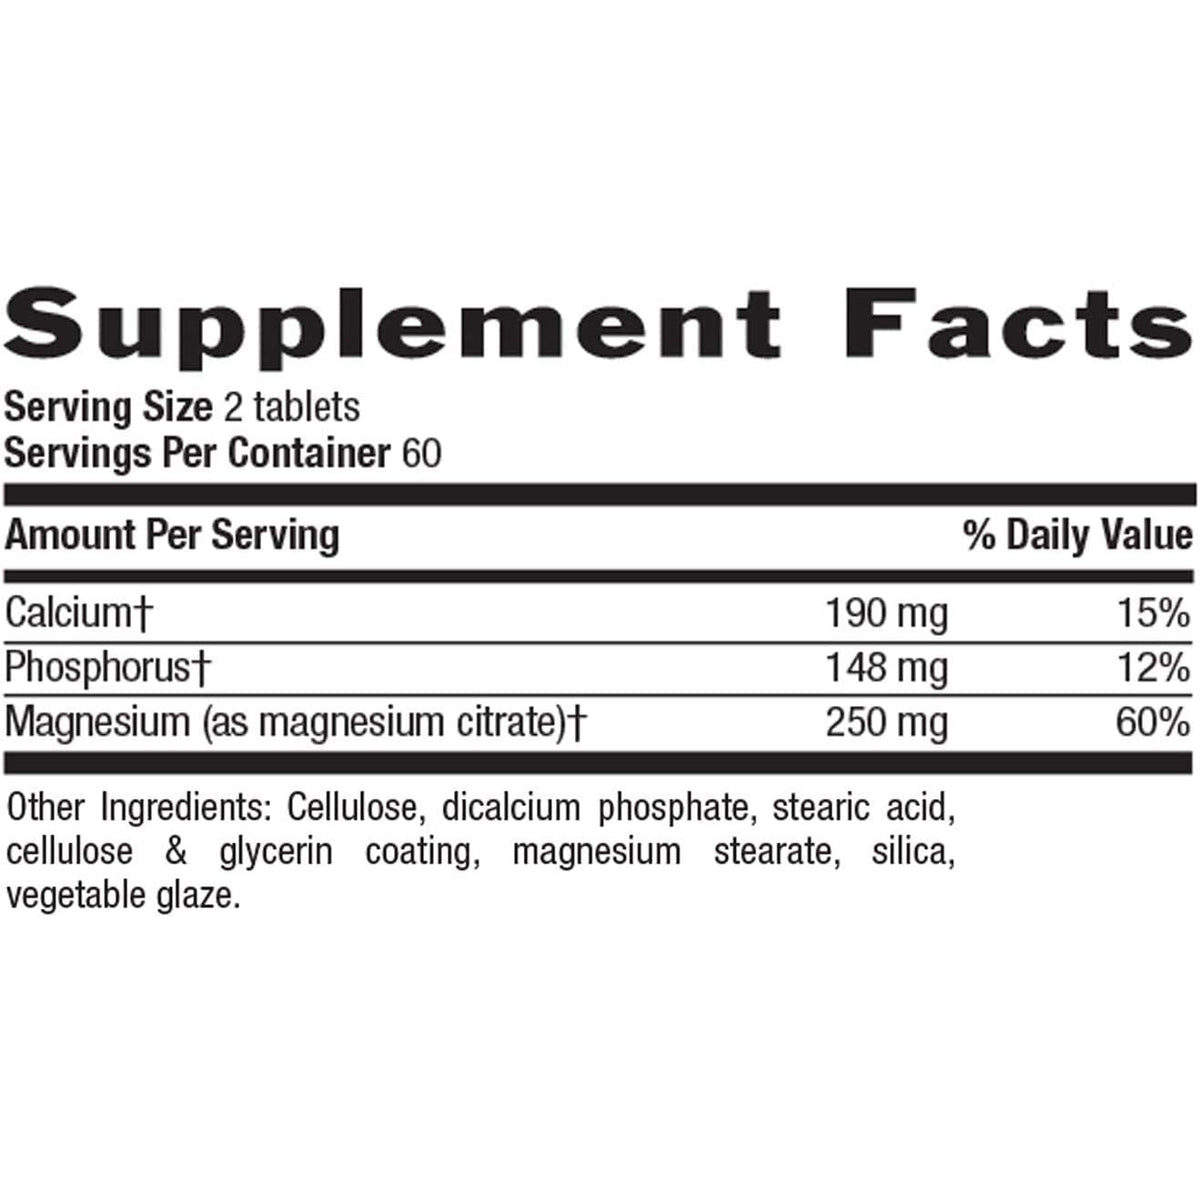 Country Life Magnesium Citrate 250 mg Gluten Free Non-GMO 120 Tablets